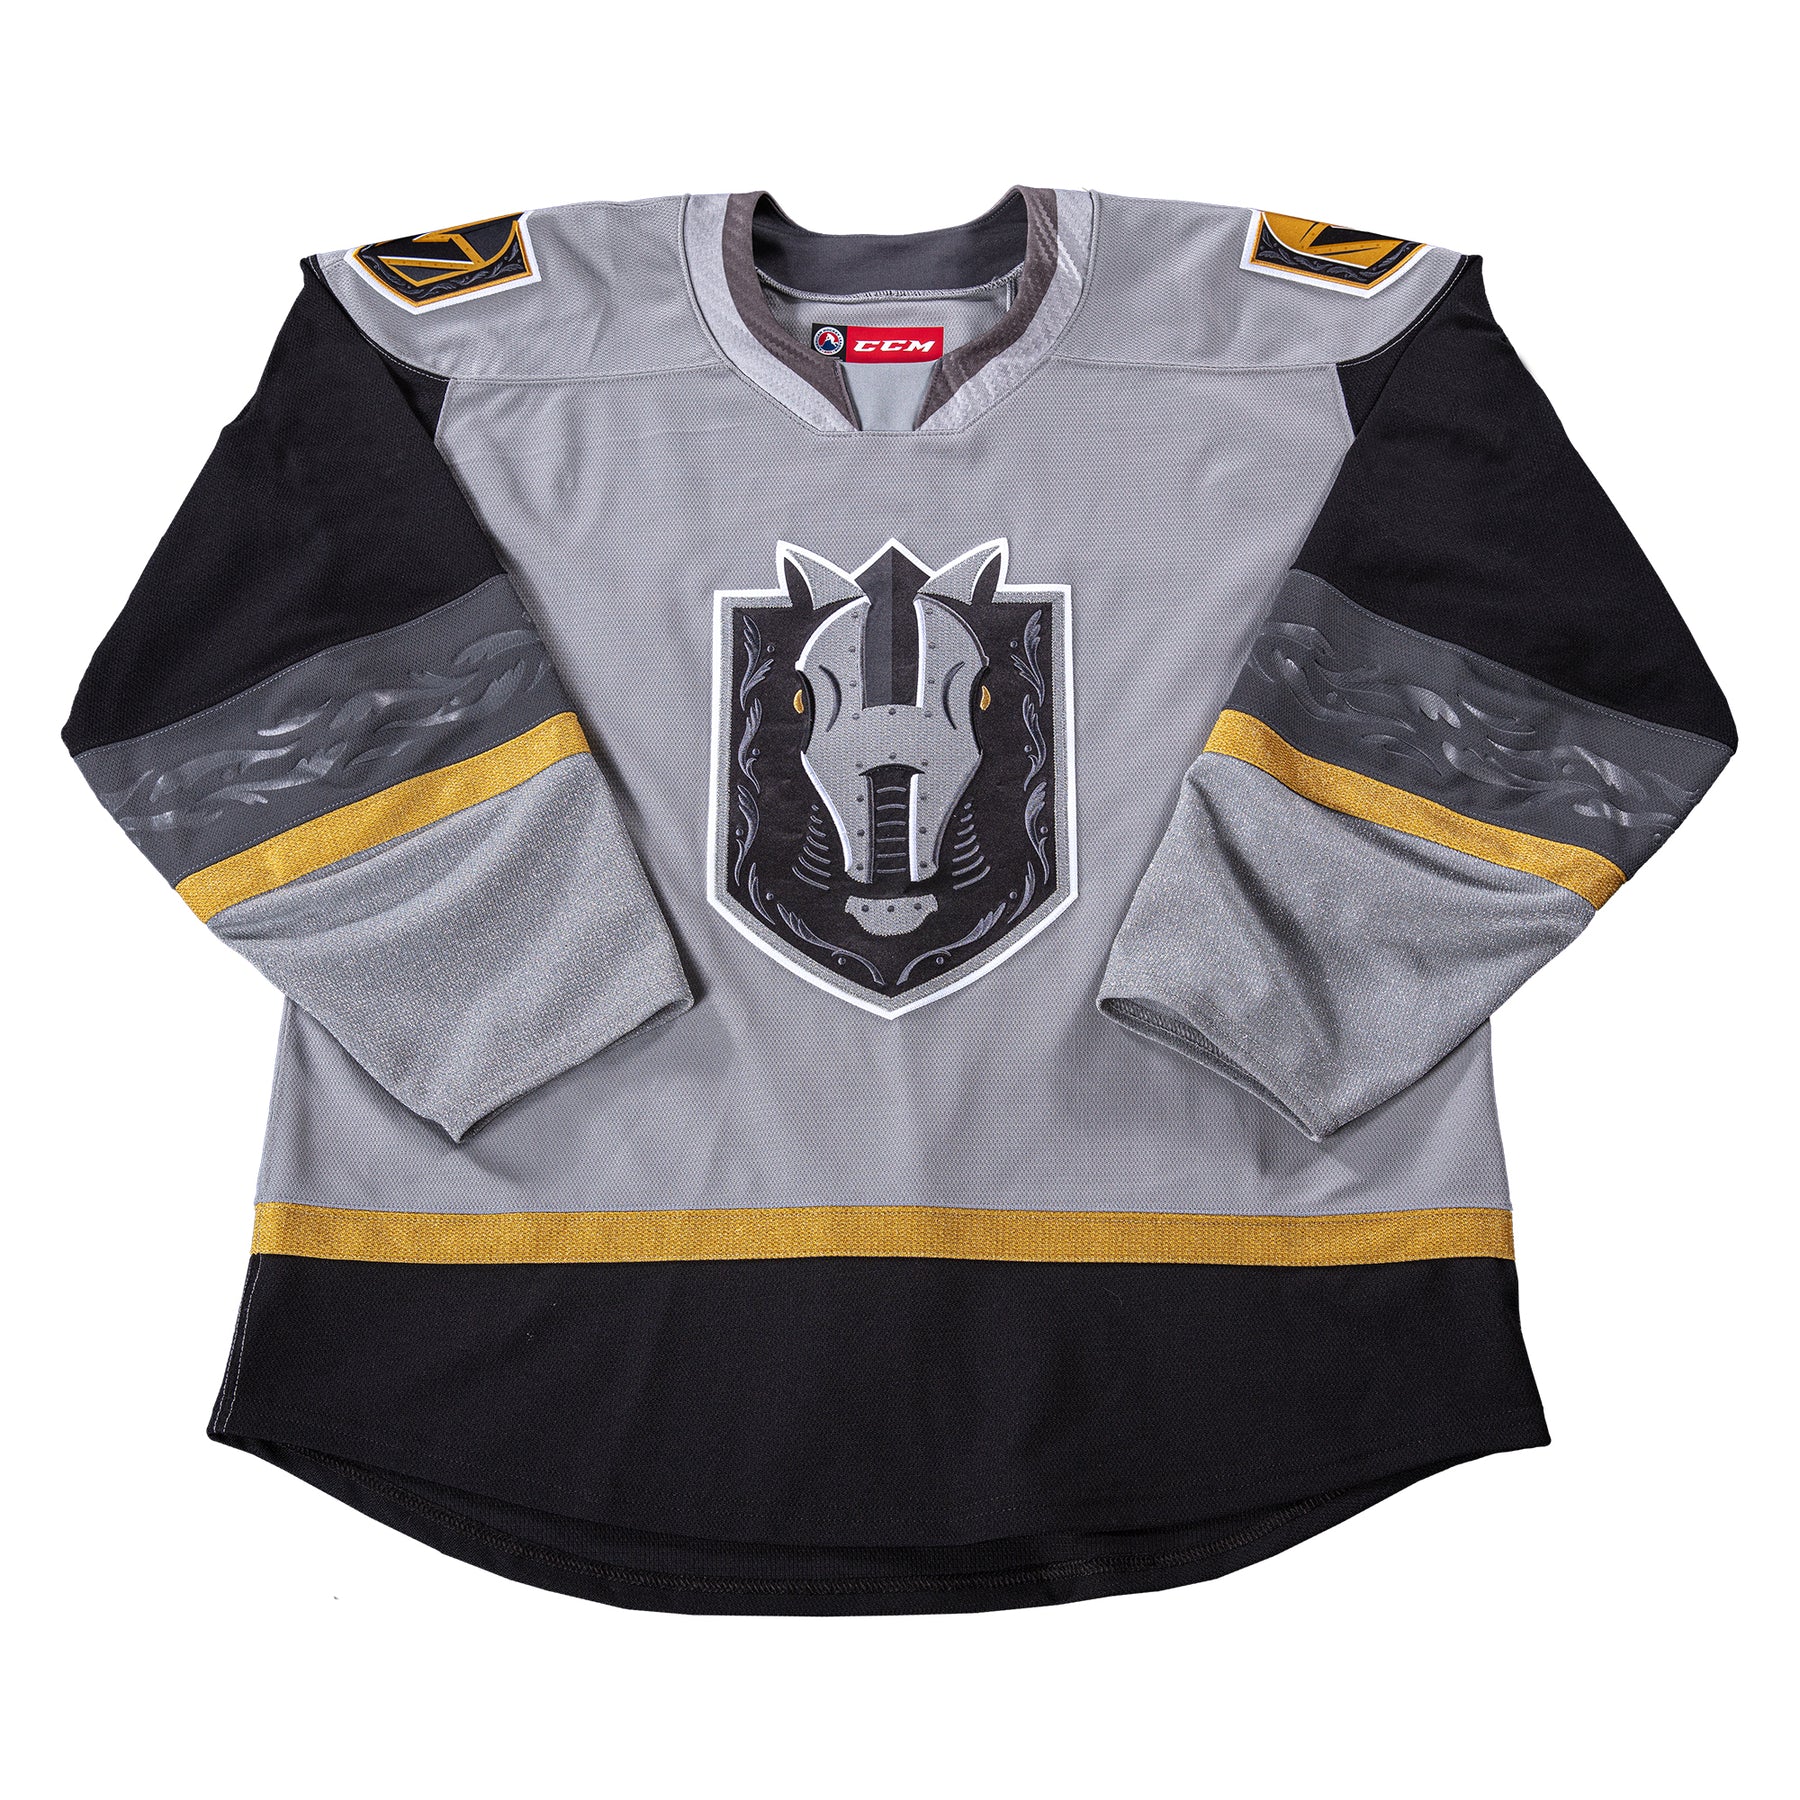 Knights 2021 Player Jersey